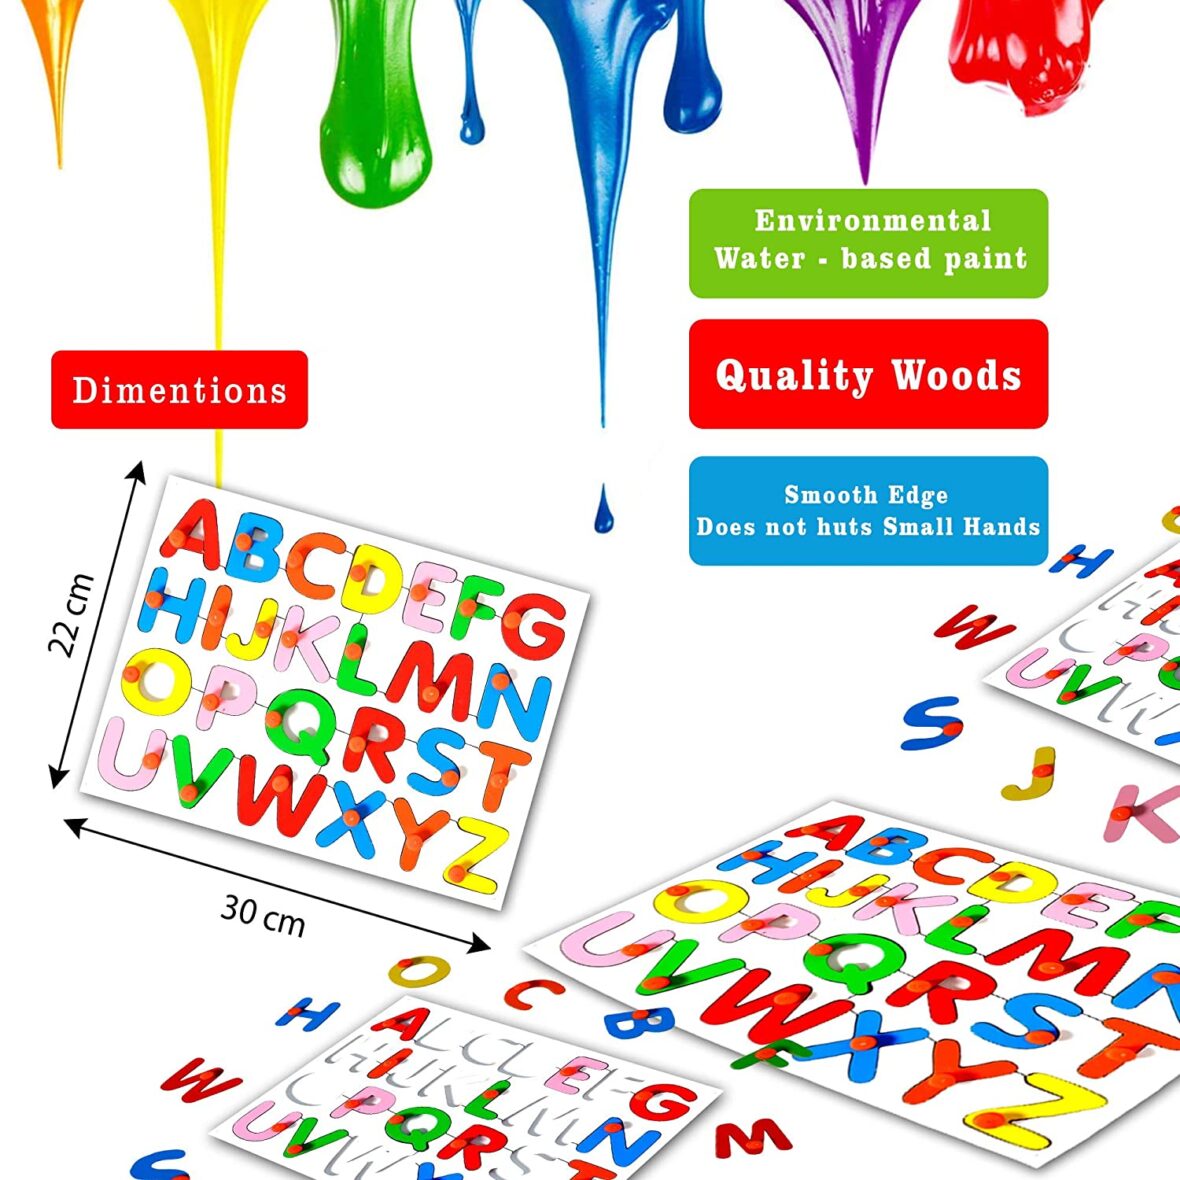 Wooden Alphabets Puzzle Games for Kids Toys, Abcd Toys Alphabets for Kids Learning with Knob